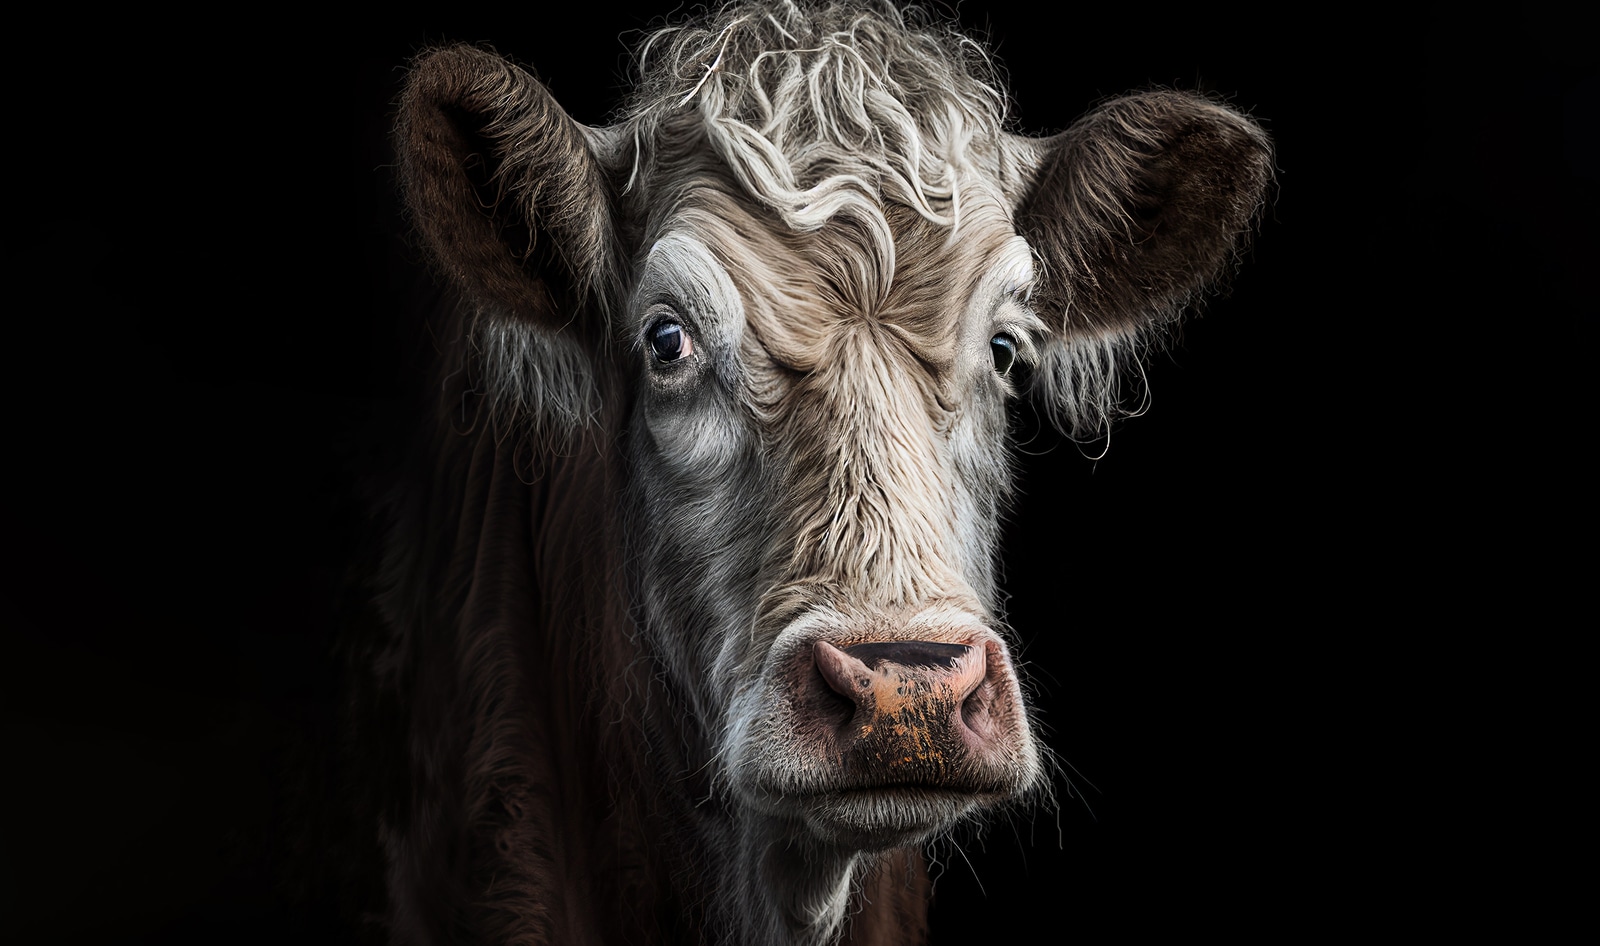 Cows Grow Old In This Campaign Aimed at Getting You to Eat More Plants